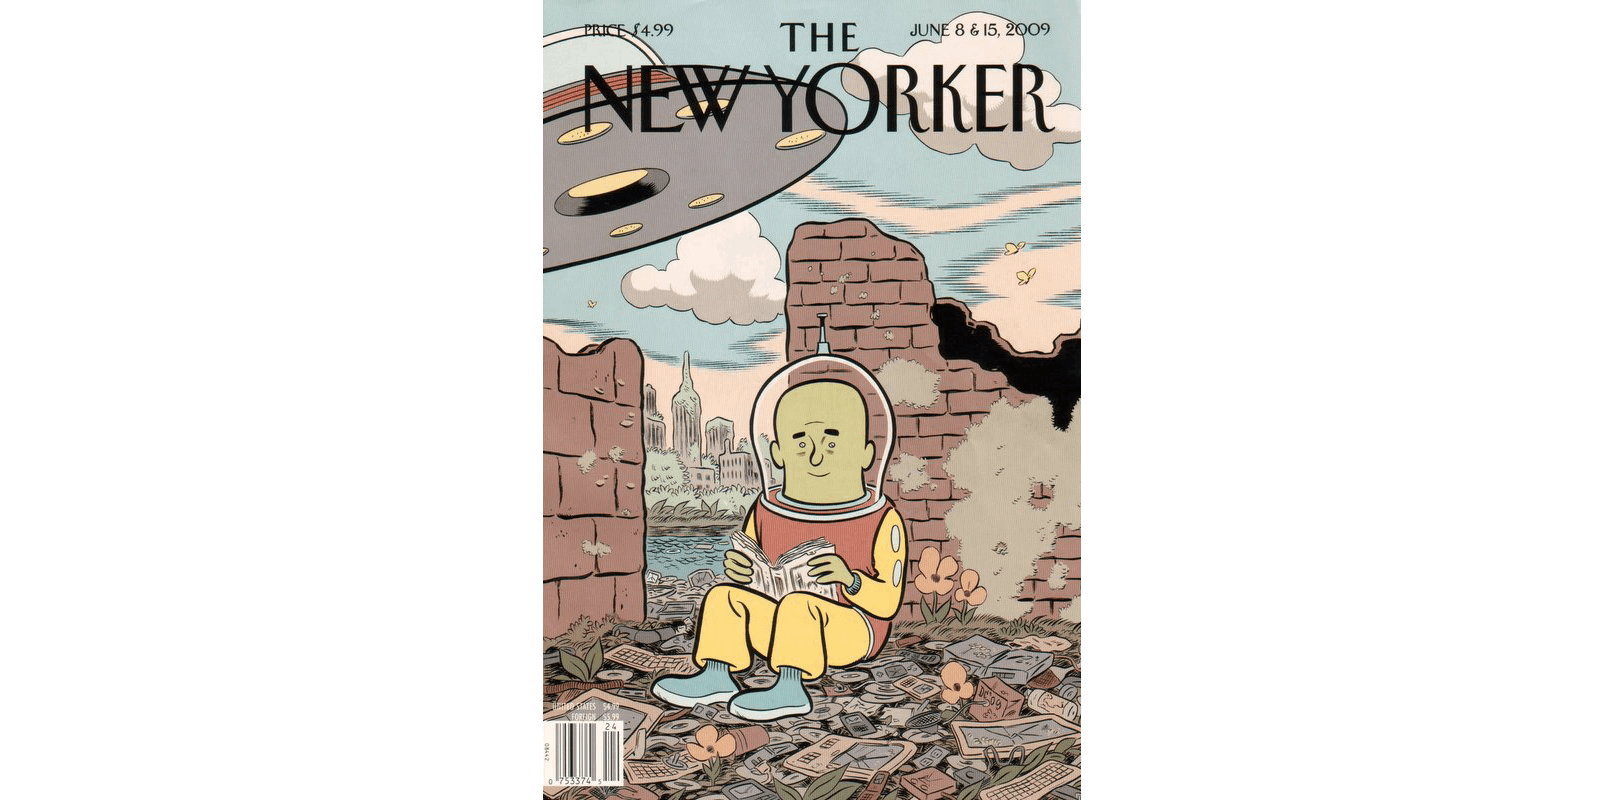 The cover of The New Yorker, June 2009